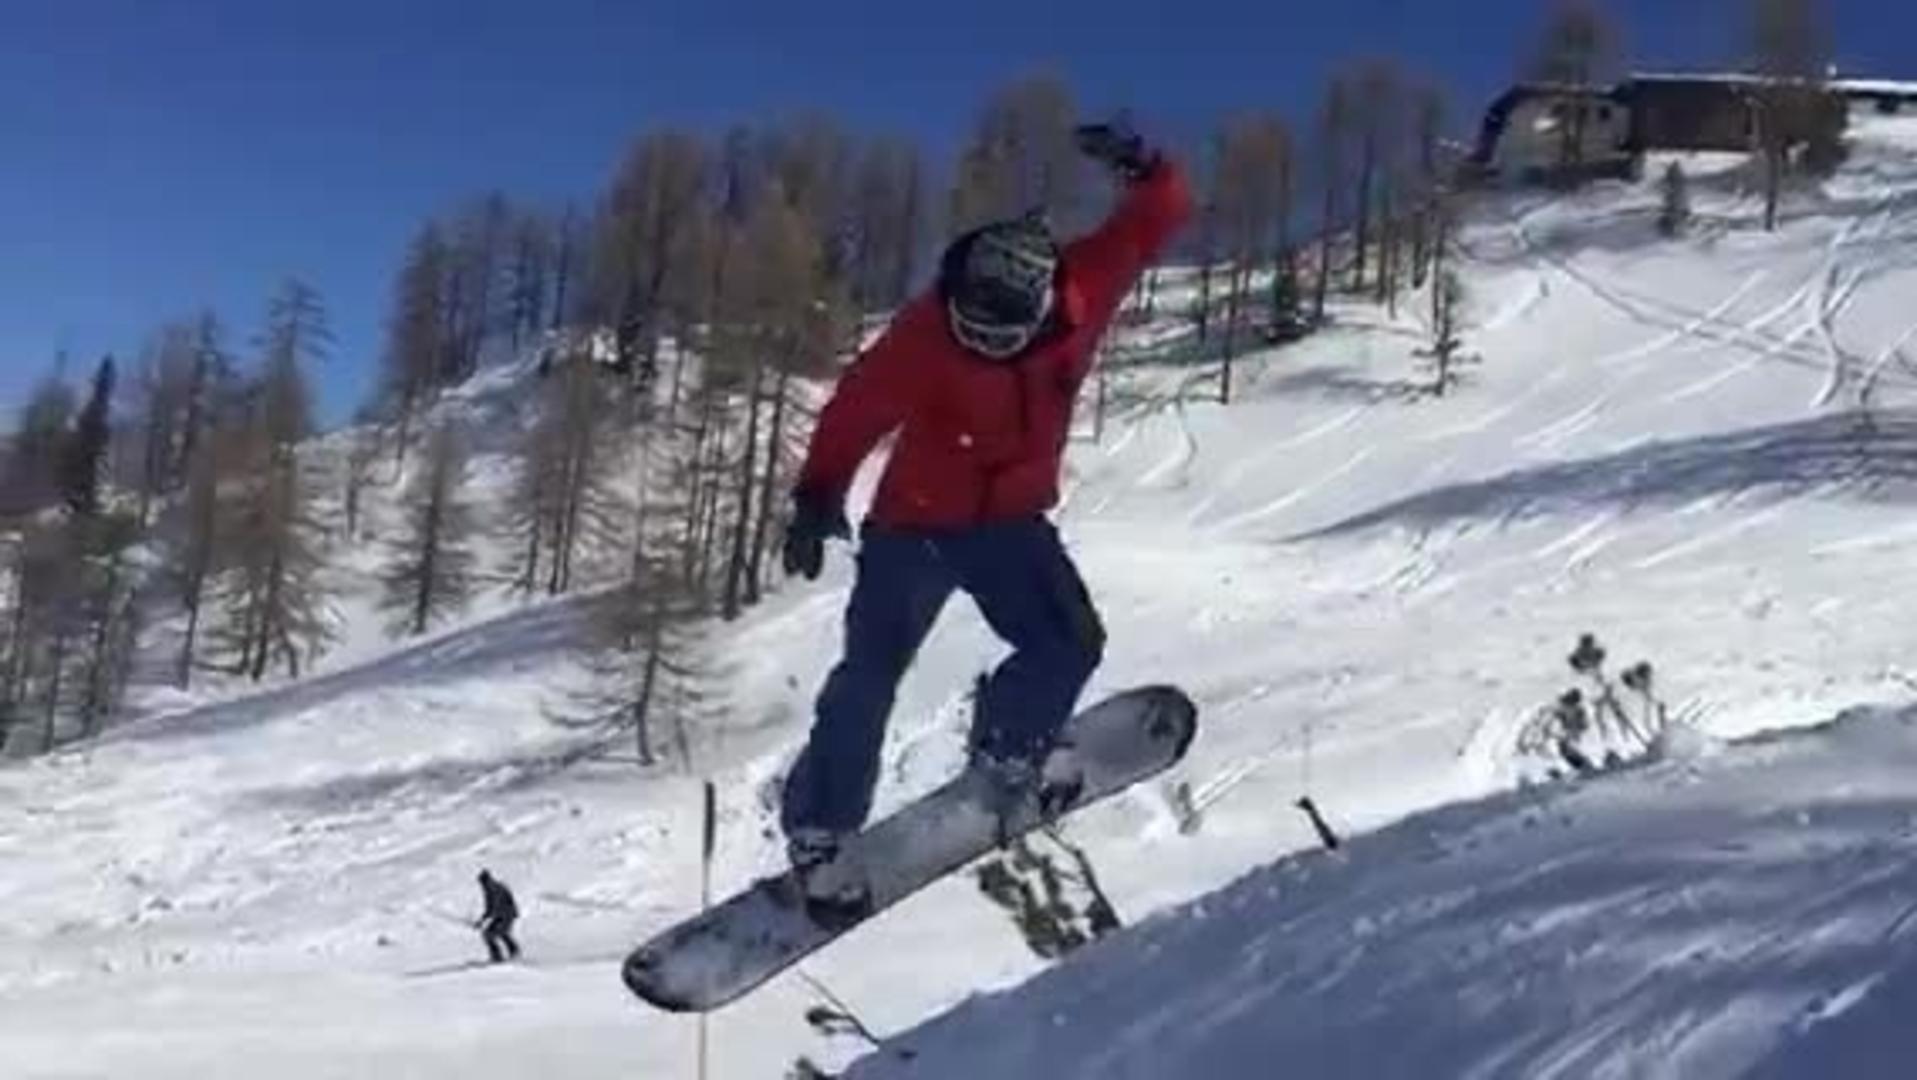 Skier Goes off Jump and Collides with Snowboarder | Jukin Media